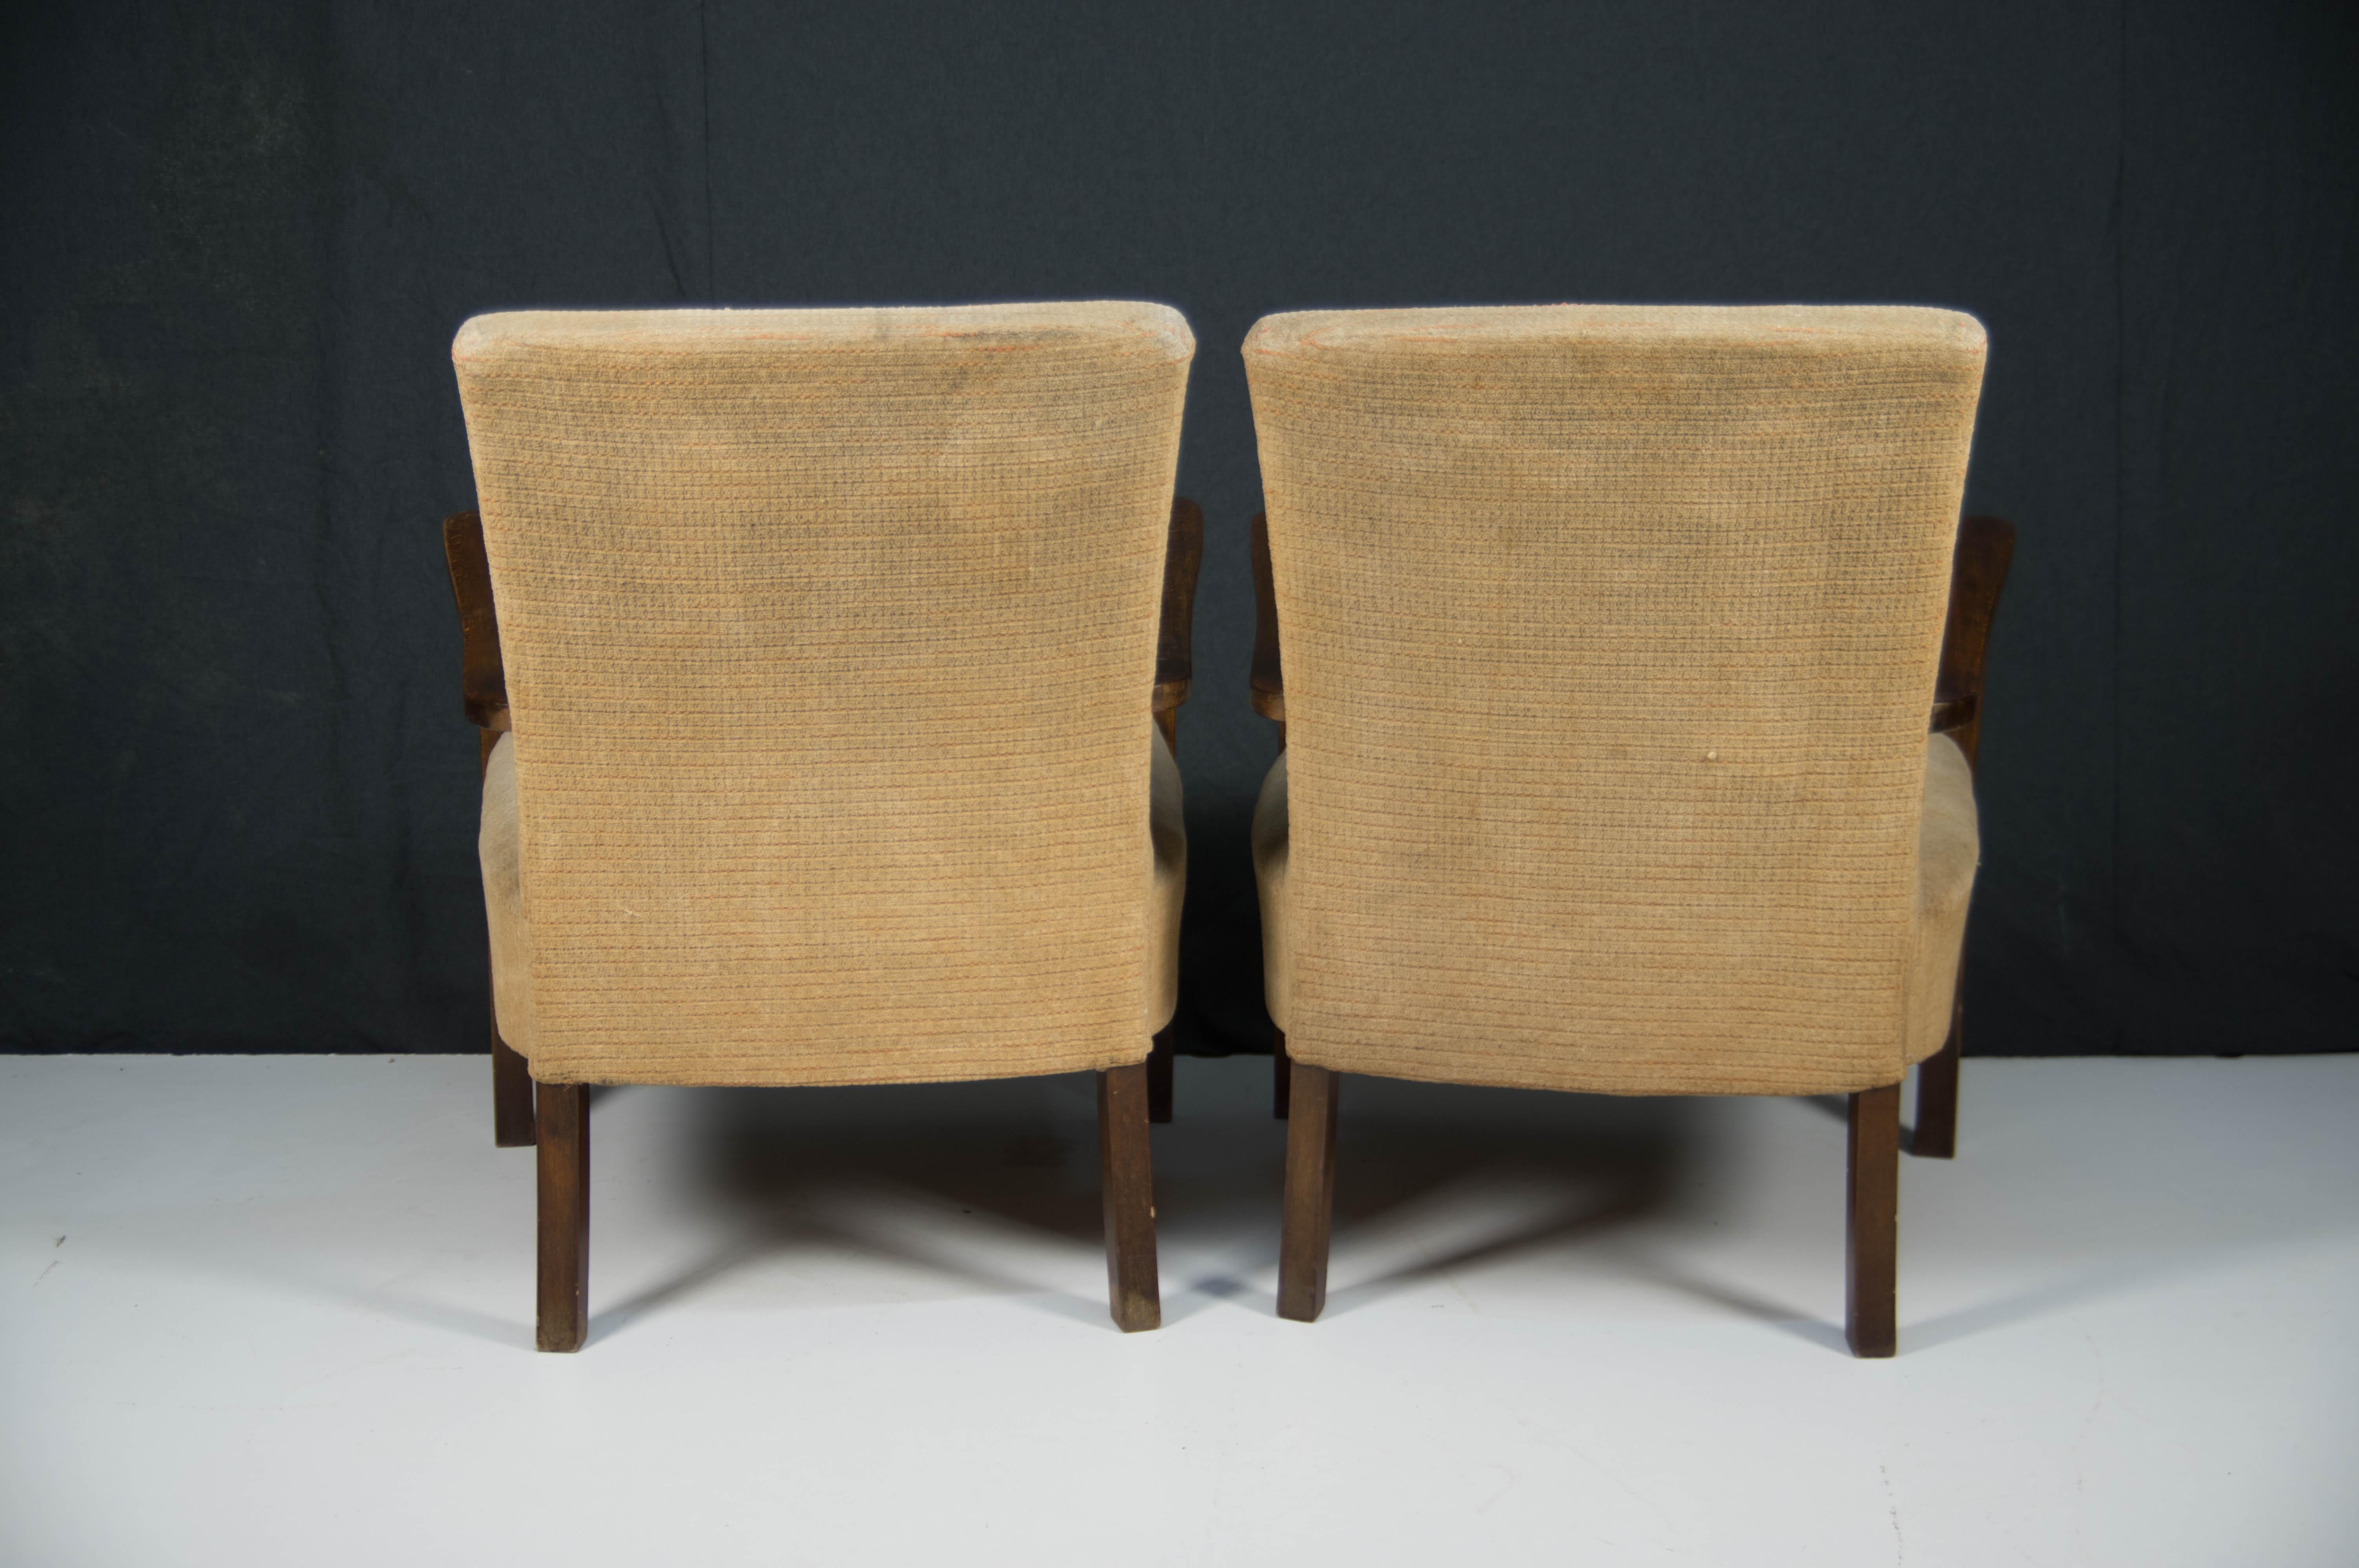 1930s style armchairs